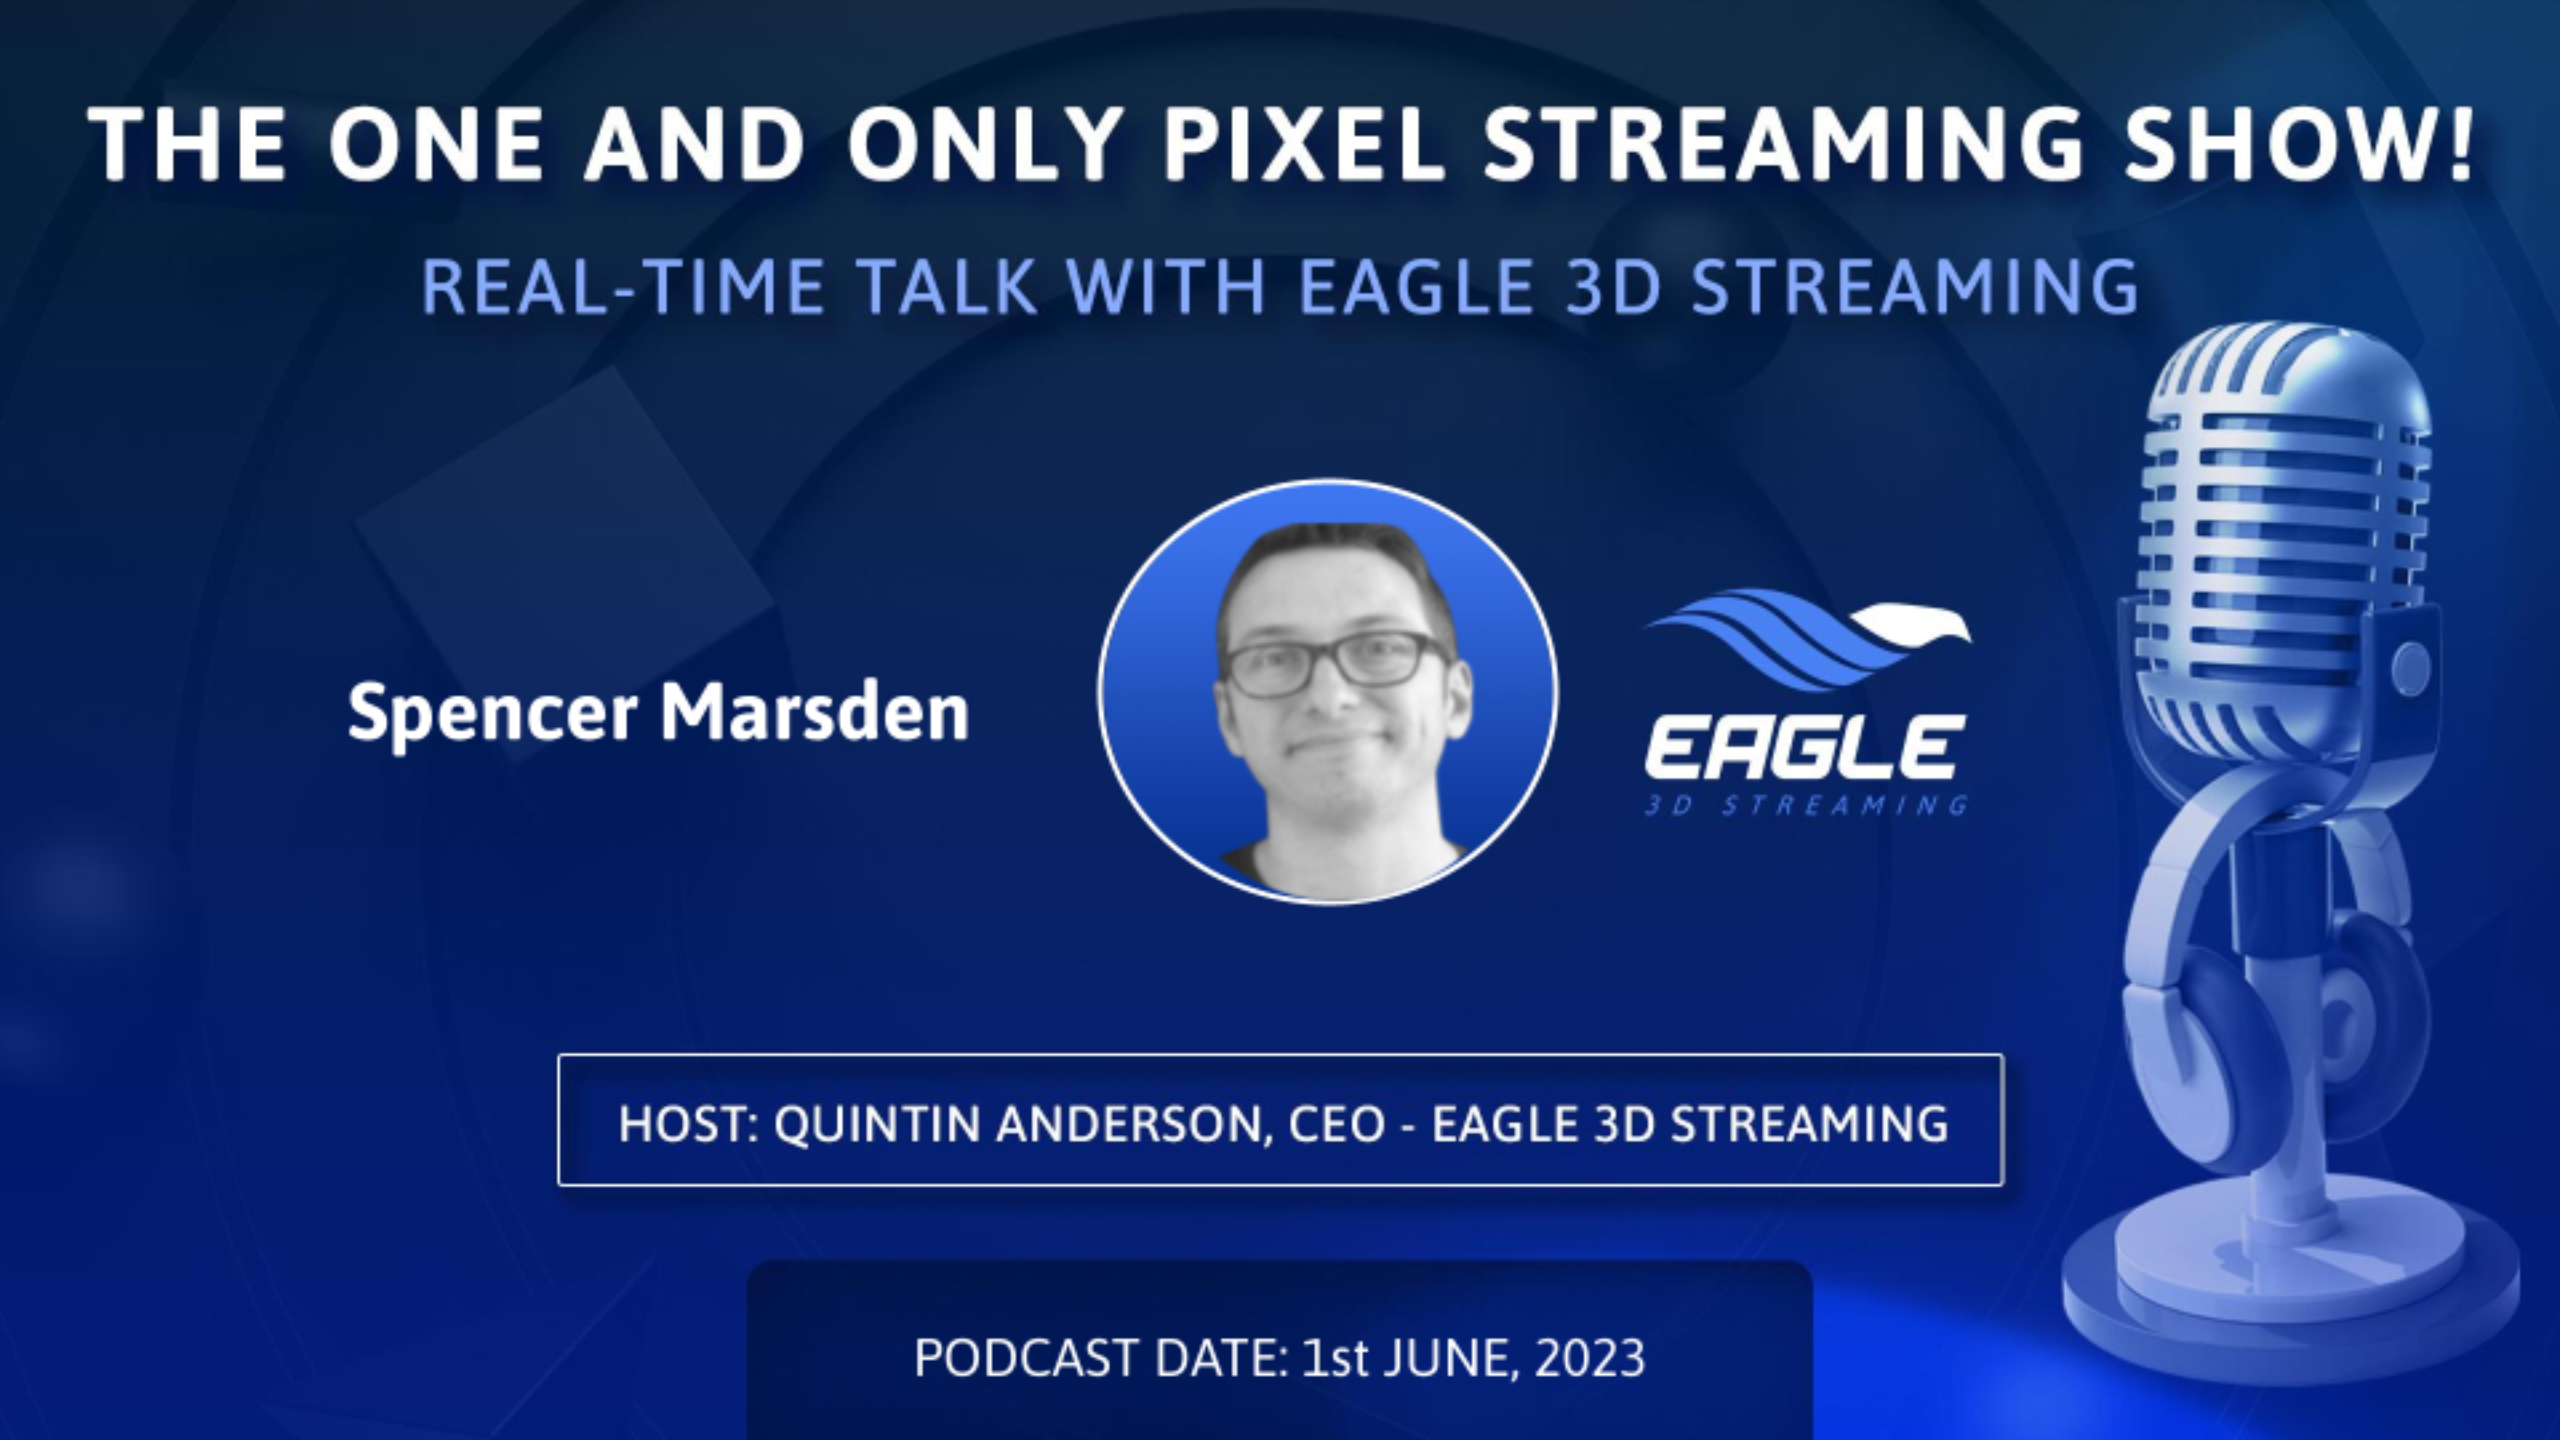 Pixel Streaming real-time talk with Spencer Marsden